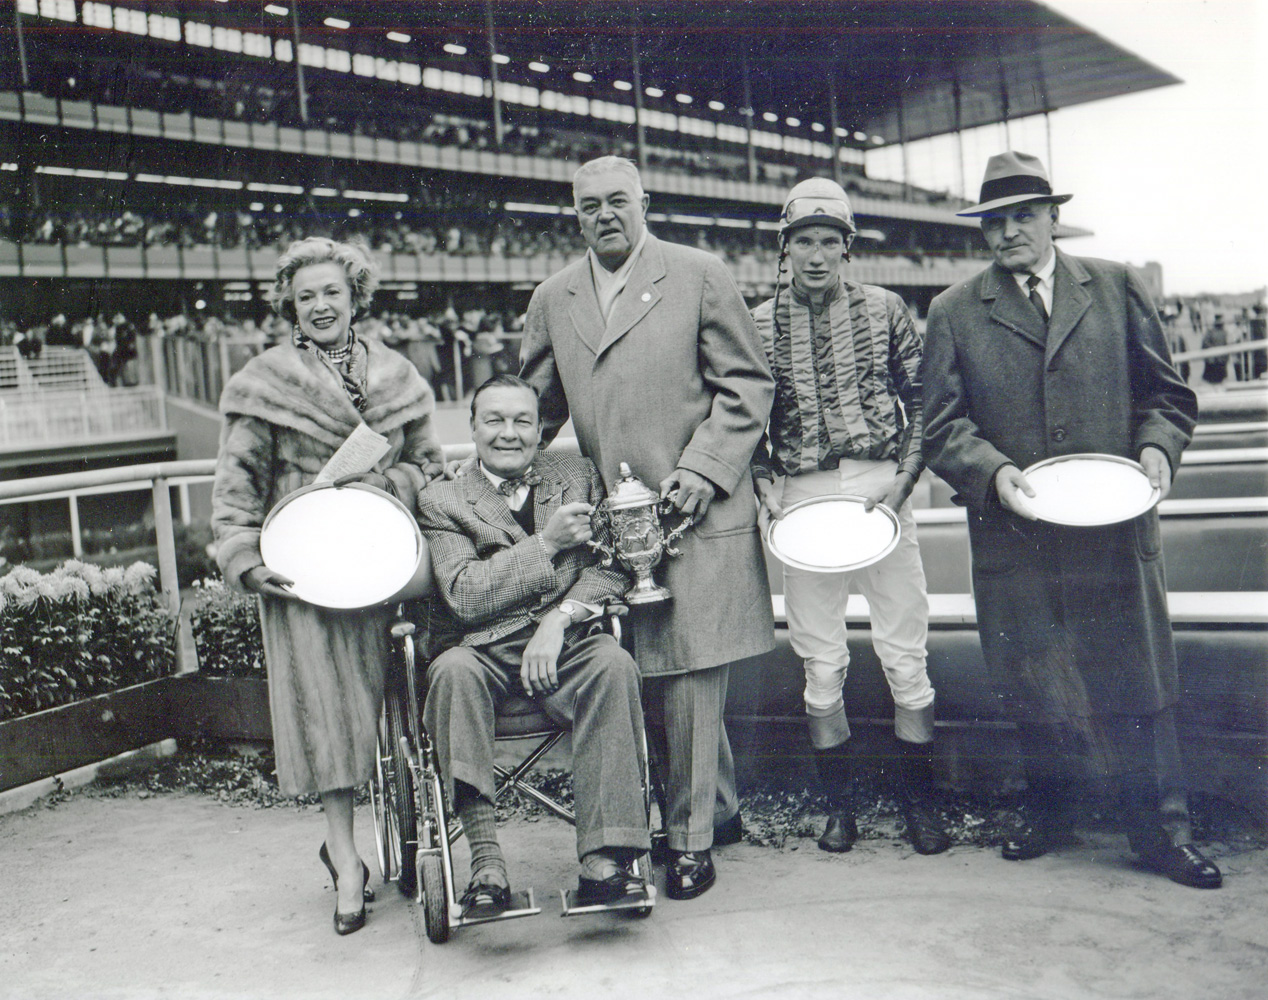 Mr. and Mrs. Stephen "Laddie" Sanford, S. Bryce Wing, jockey Thomas Walsh, and trainer Hollie Hughes at the 1959 Grand National Steeplechase trophy presentation (won by Sun Dog) (Keeneland Library Morgan Collection/Museum Collection)